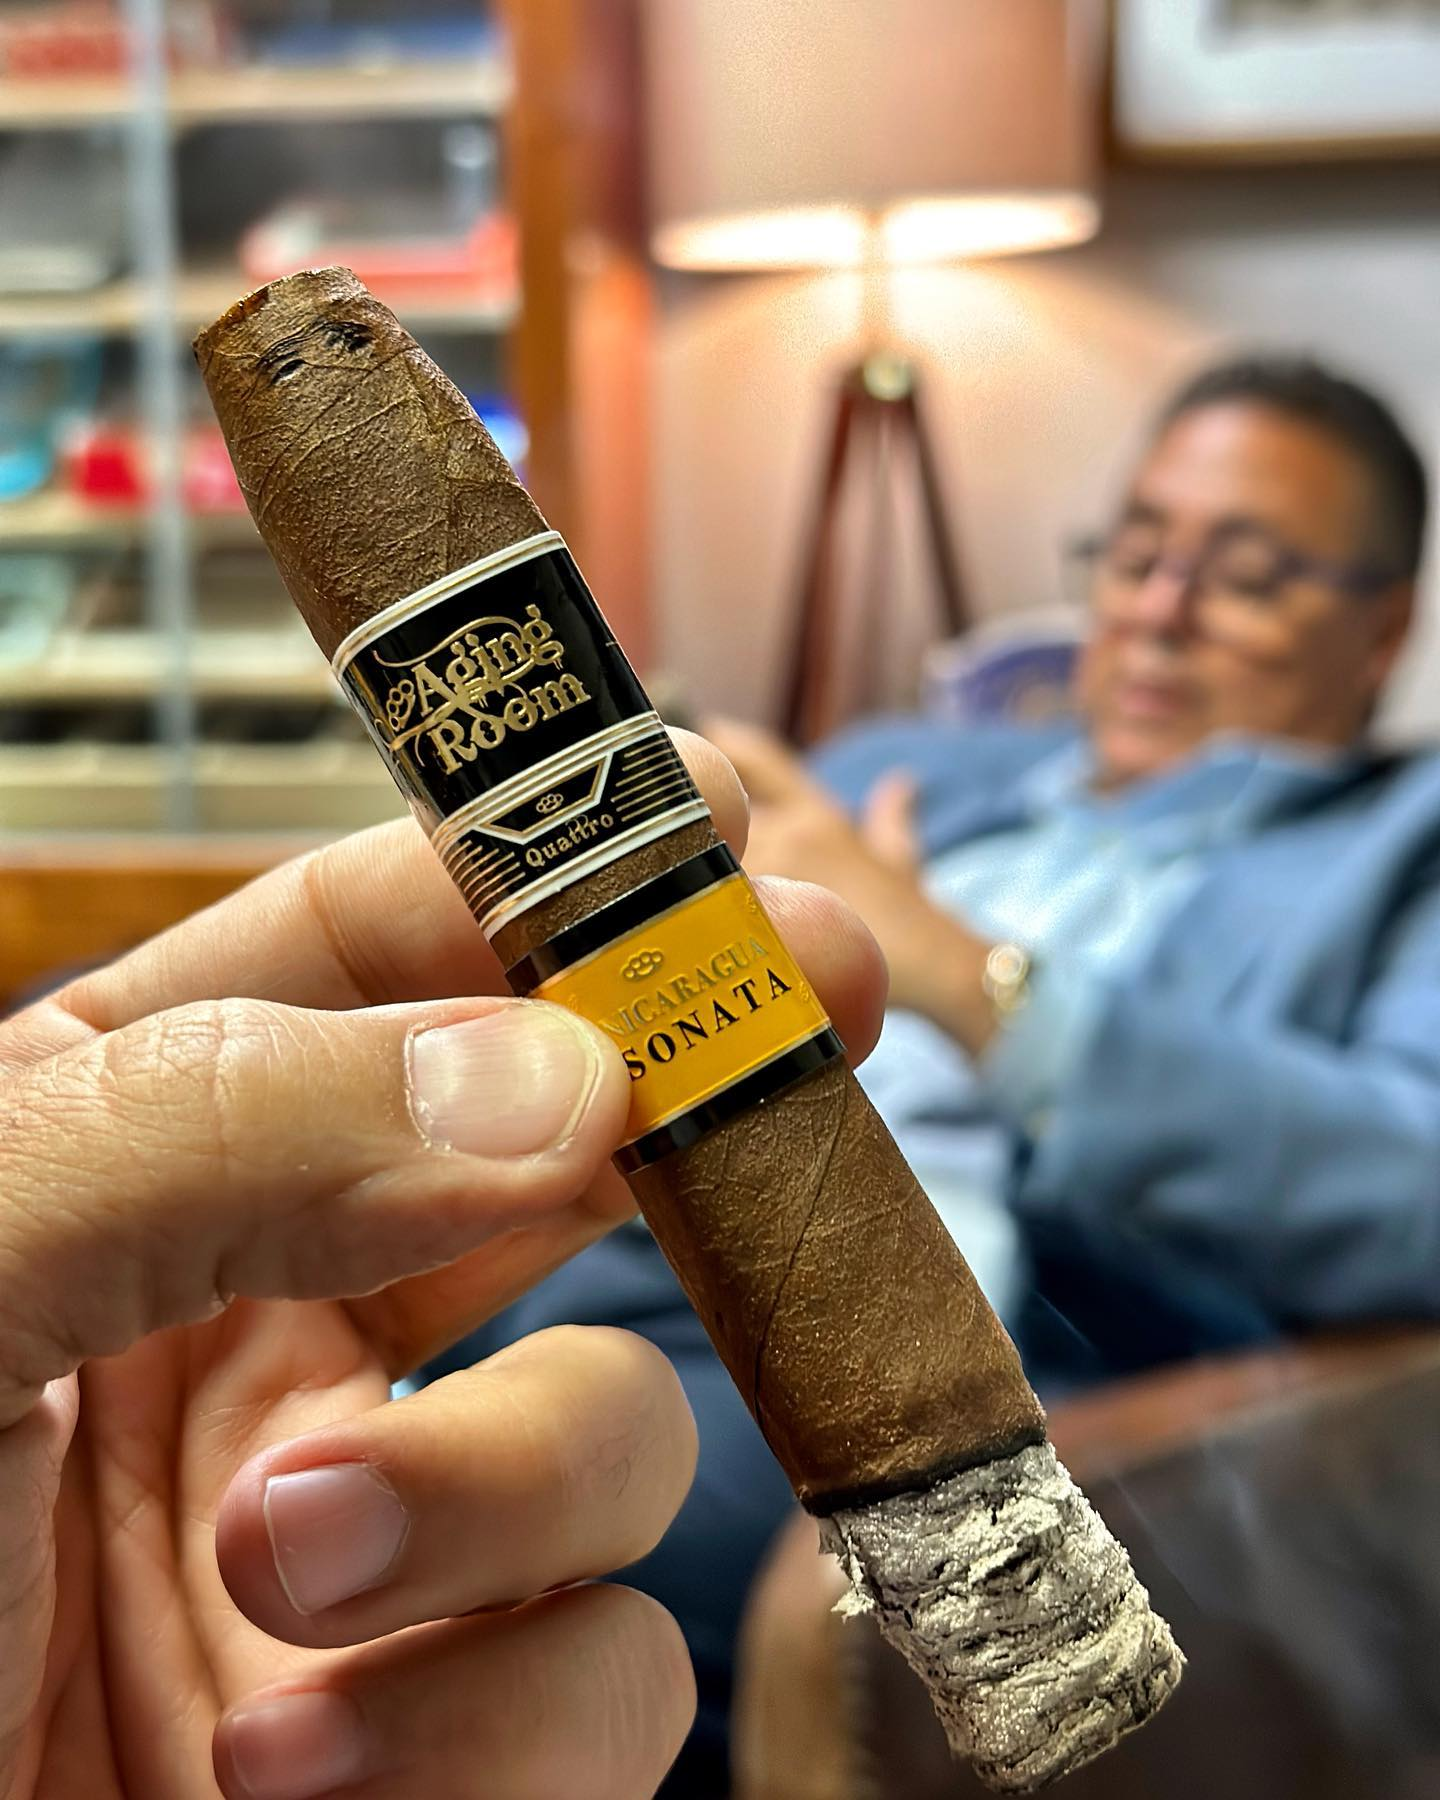 An image of the Aging Room Quattro Nicaragua Sonata cigar, highly recommended by experts for its rich flavor and aroma.